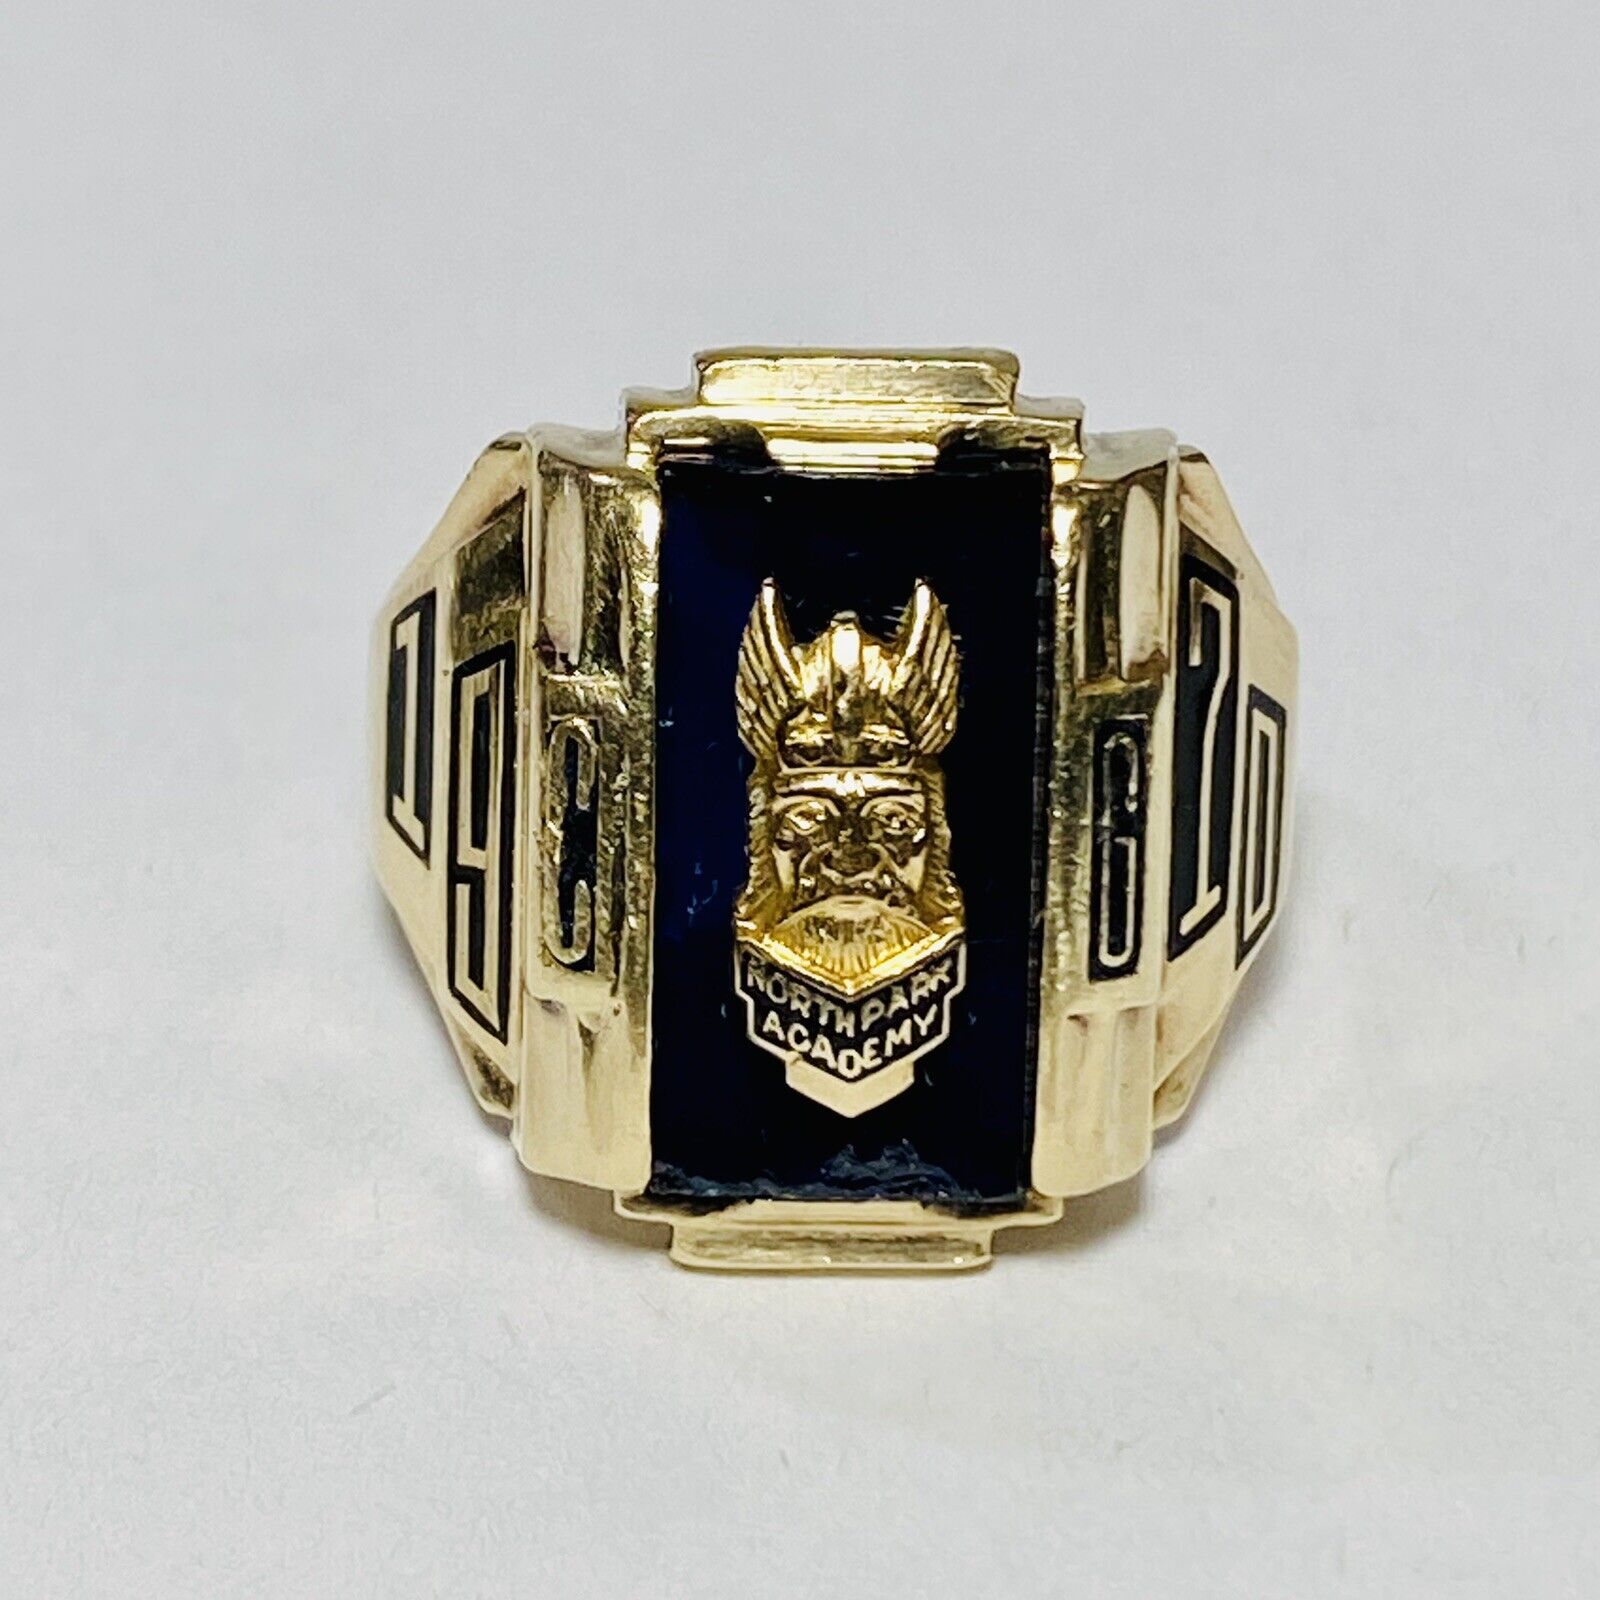 1970 North Park Academy Chicago Vikings Jostens 10K Yellow Gold Class Ring 13.3g